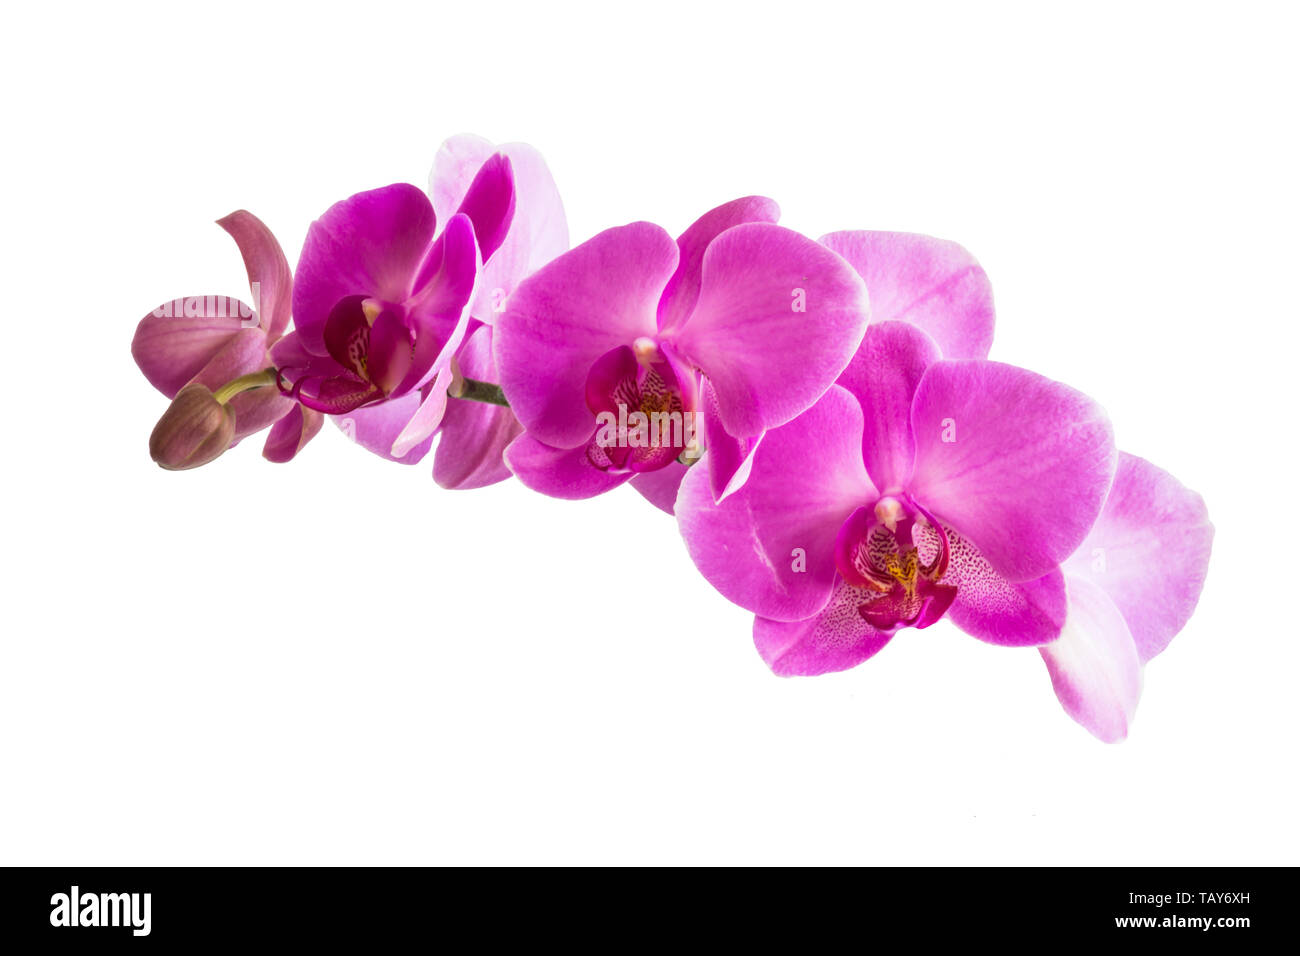 Beautiful orchid purple flowers isolated on white background. Stock Photo